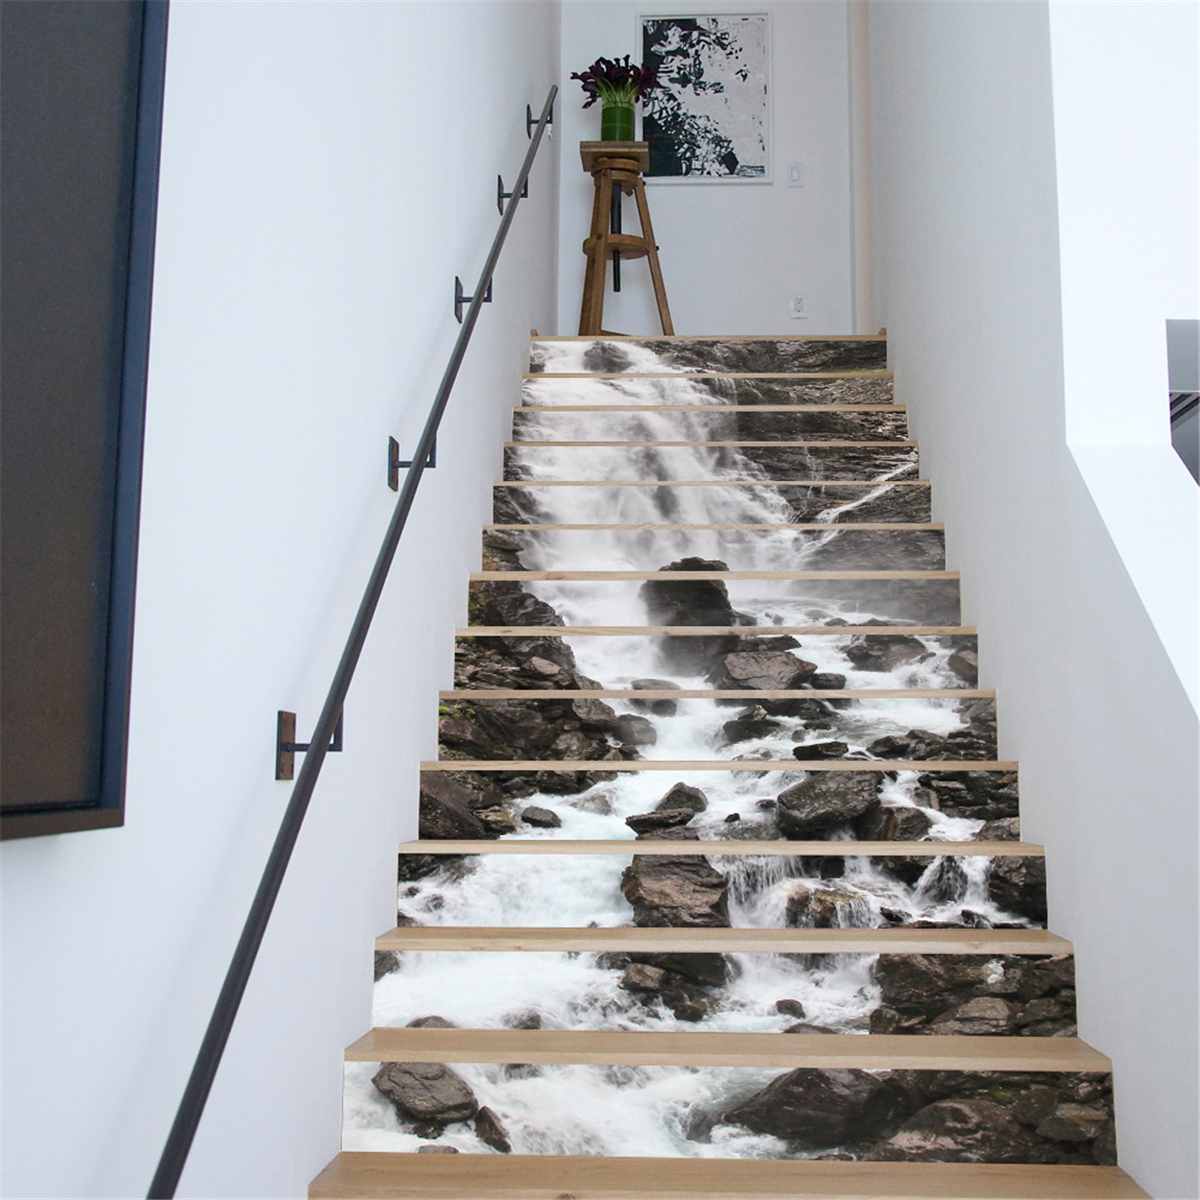 13pcs/set 3D Waterfall and Stone Stair Riser Floor Sticker Self Adhesive DIY Stairway Waterproof Eco PVC Wall Decal Home Decor